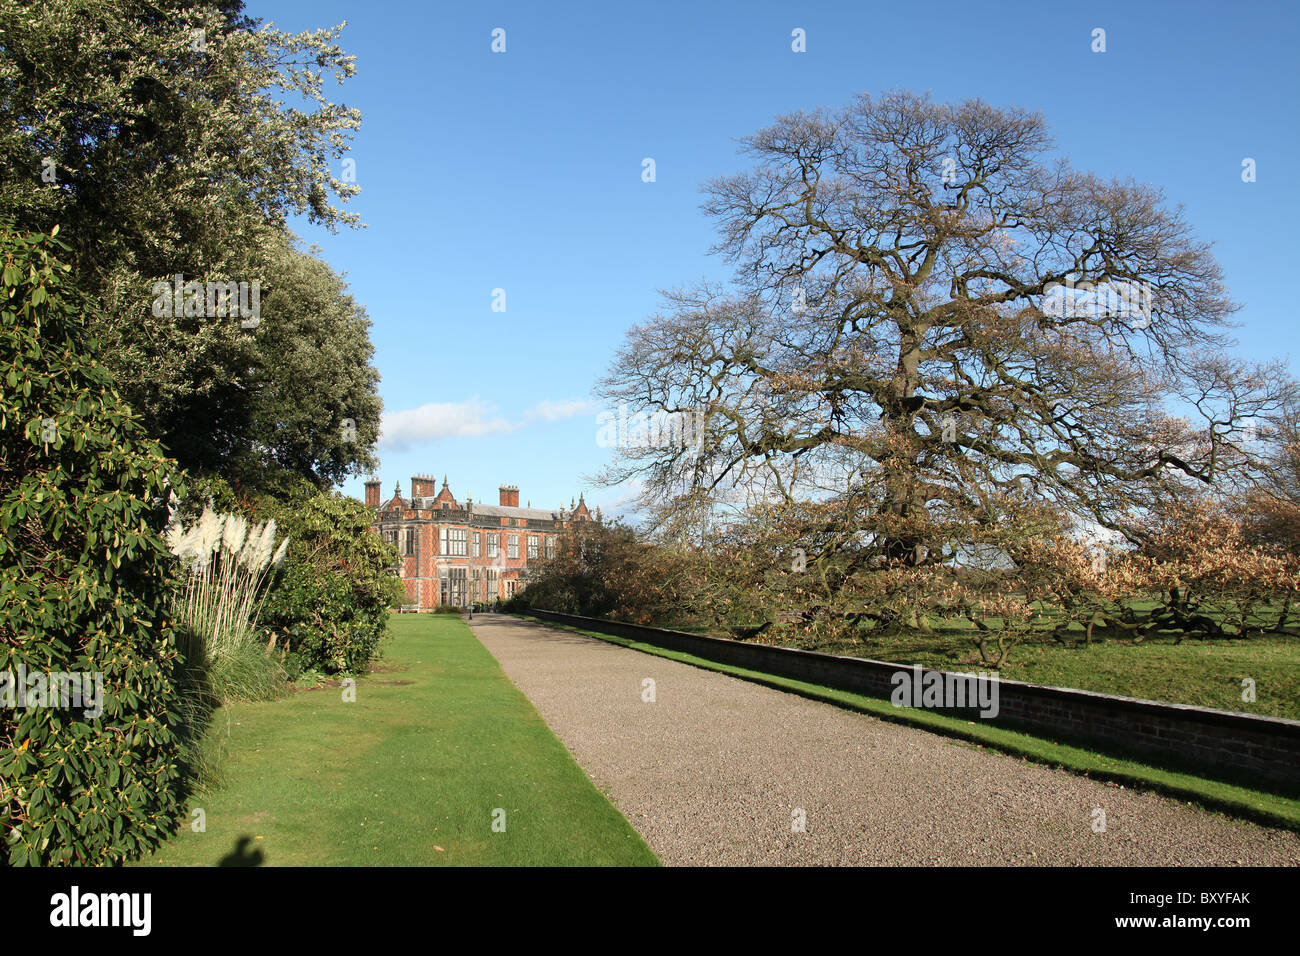 Arley Hall & Gardens, England. Autumnal view of the Furlong Walk with Arley Hall in the background. Stock Photo